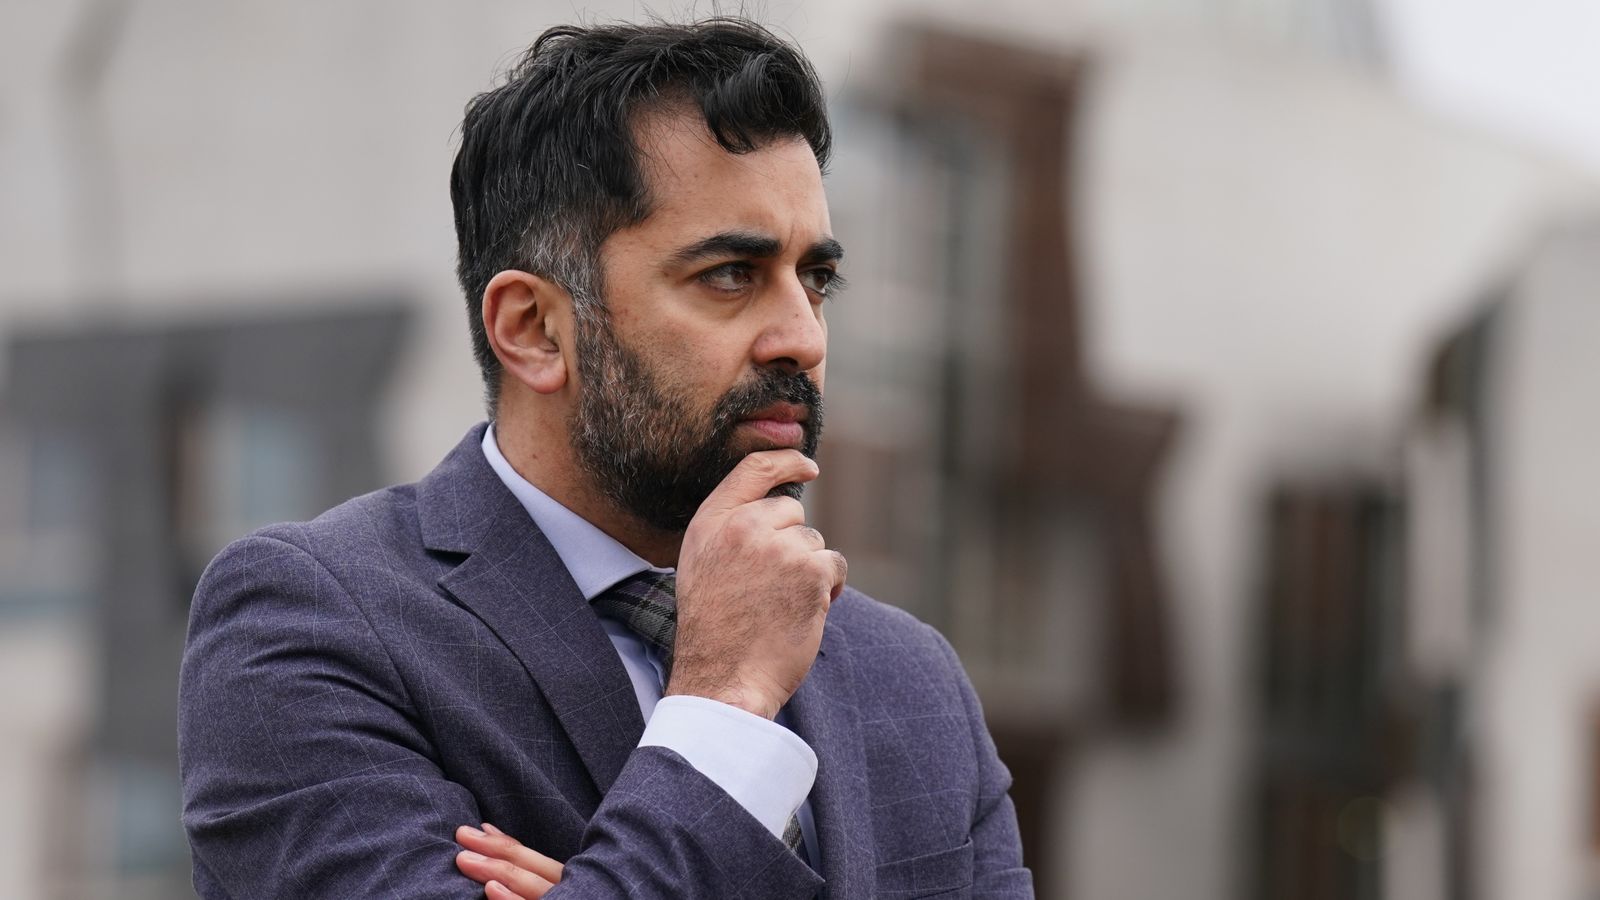 Humza Yousaf's absence from key vote on gay marriage being 'dragged up' for political reasons, SNP leadership candidate says